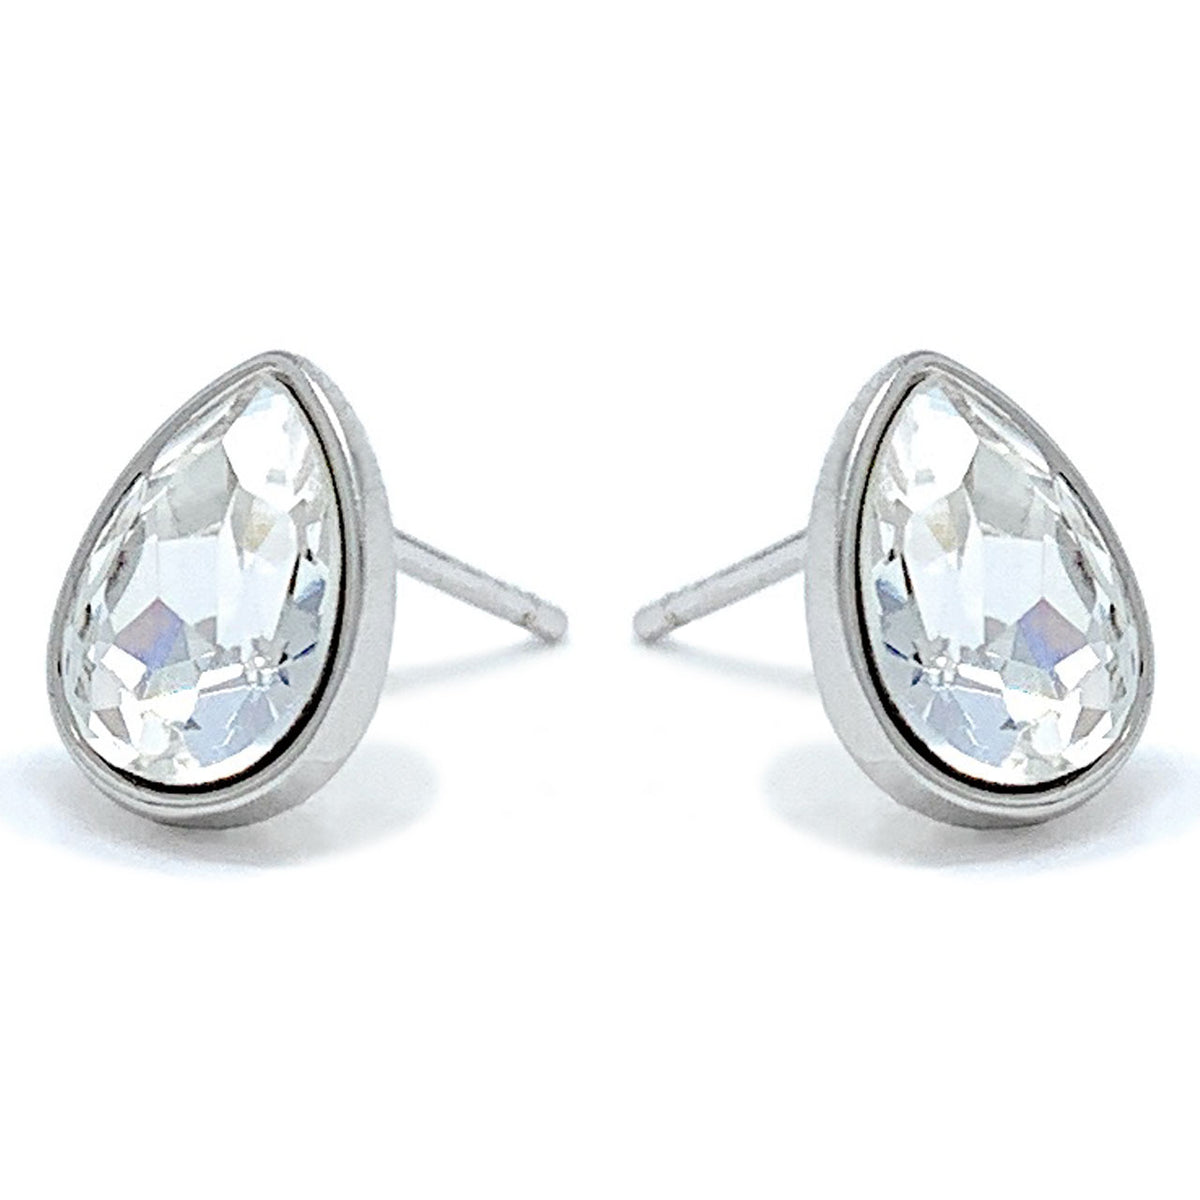 Mary Small Stud Earrings with White Clear Drop Crystals from Swarovski Silver Toned Rhodium Plated - Ed Heart